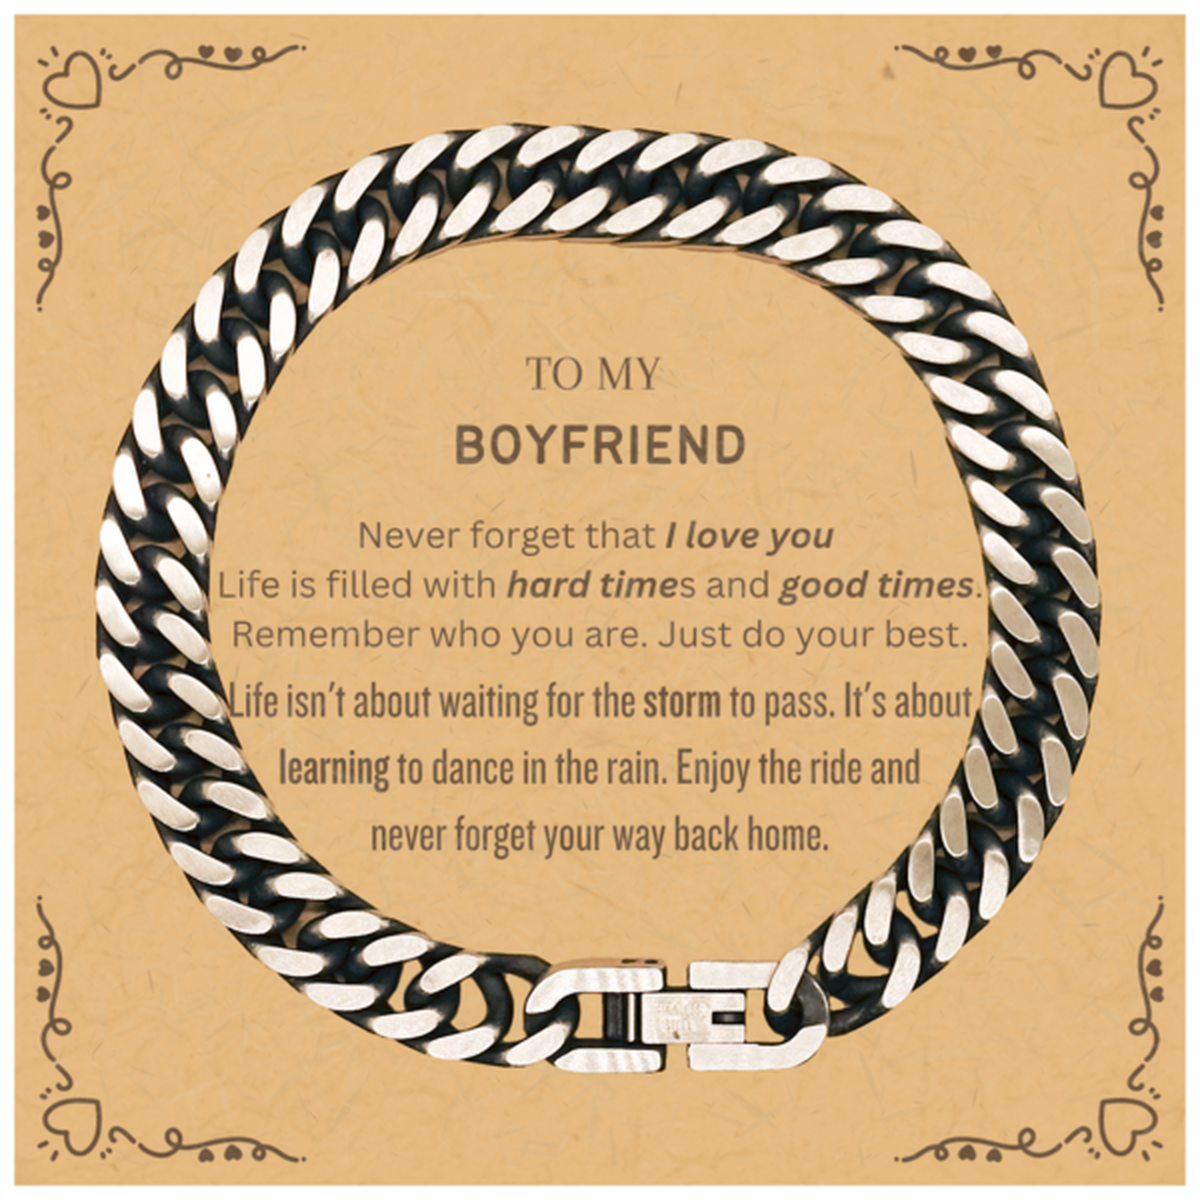 Christmas Boyfriend Cuban Link Chain Bracelet Gifts, To My Boyfriend Birthday Thank You Gifts For Boyfriend, Graduation Unique Gifts For Boyfriend To My Boyfriend Never forget that I love you life is filled with hard times and good times. Remember who you